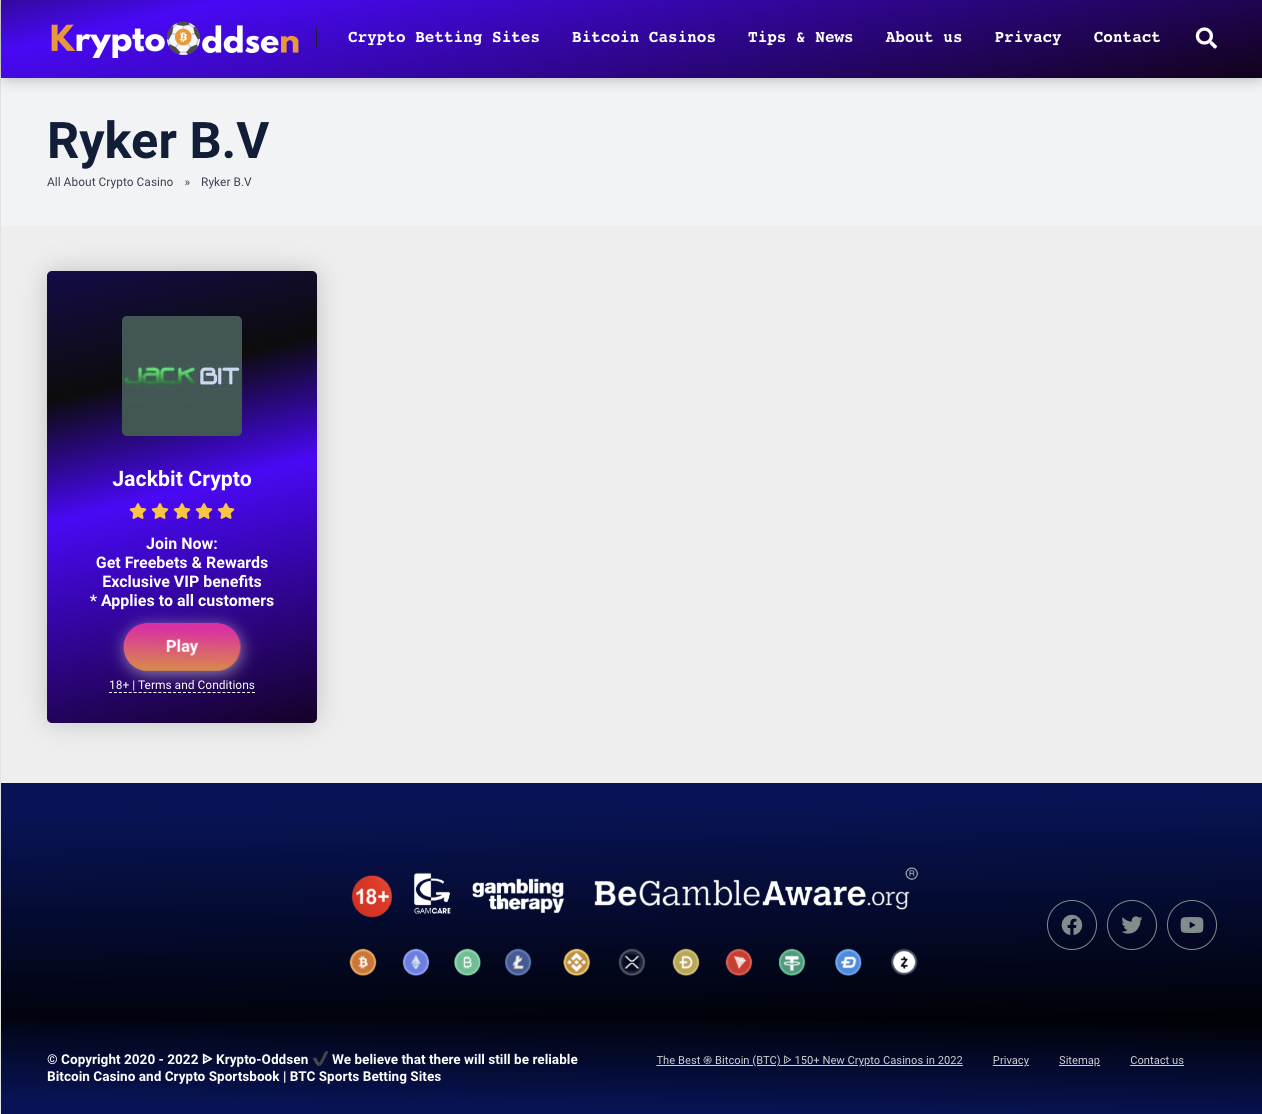 Ryker B.V Owned Operated Casino